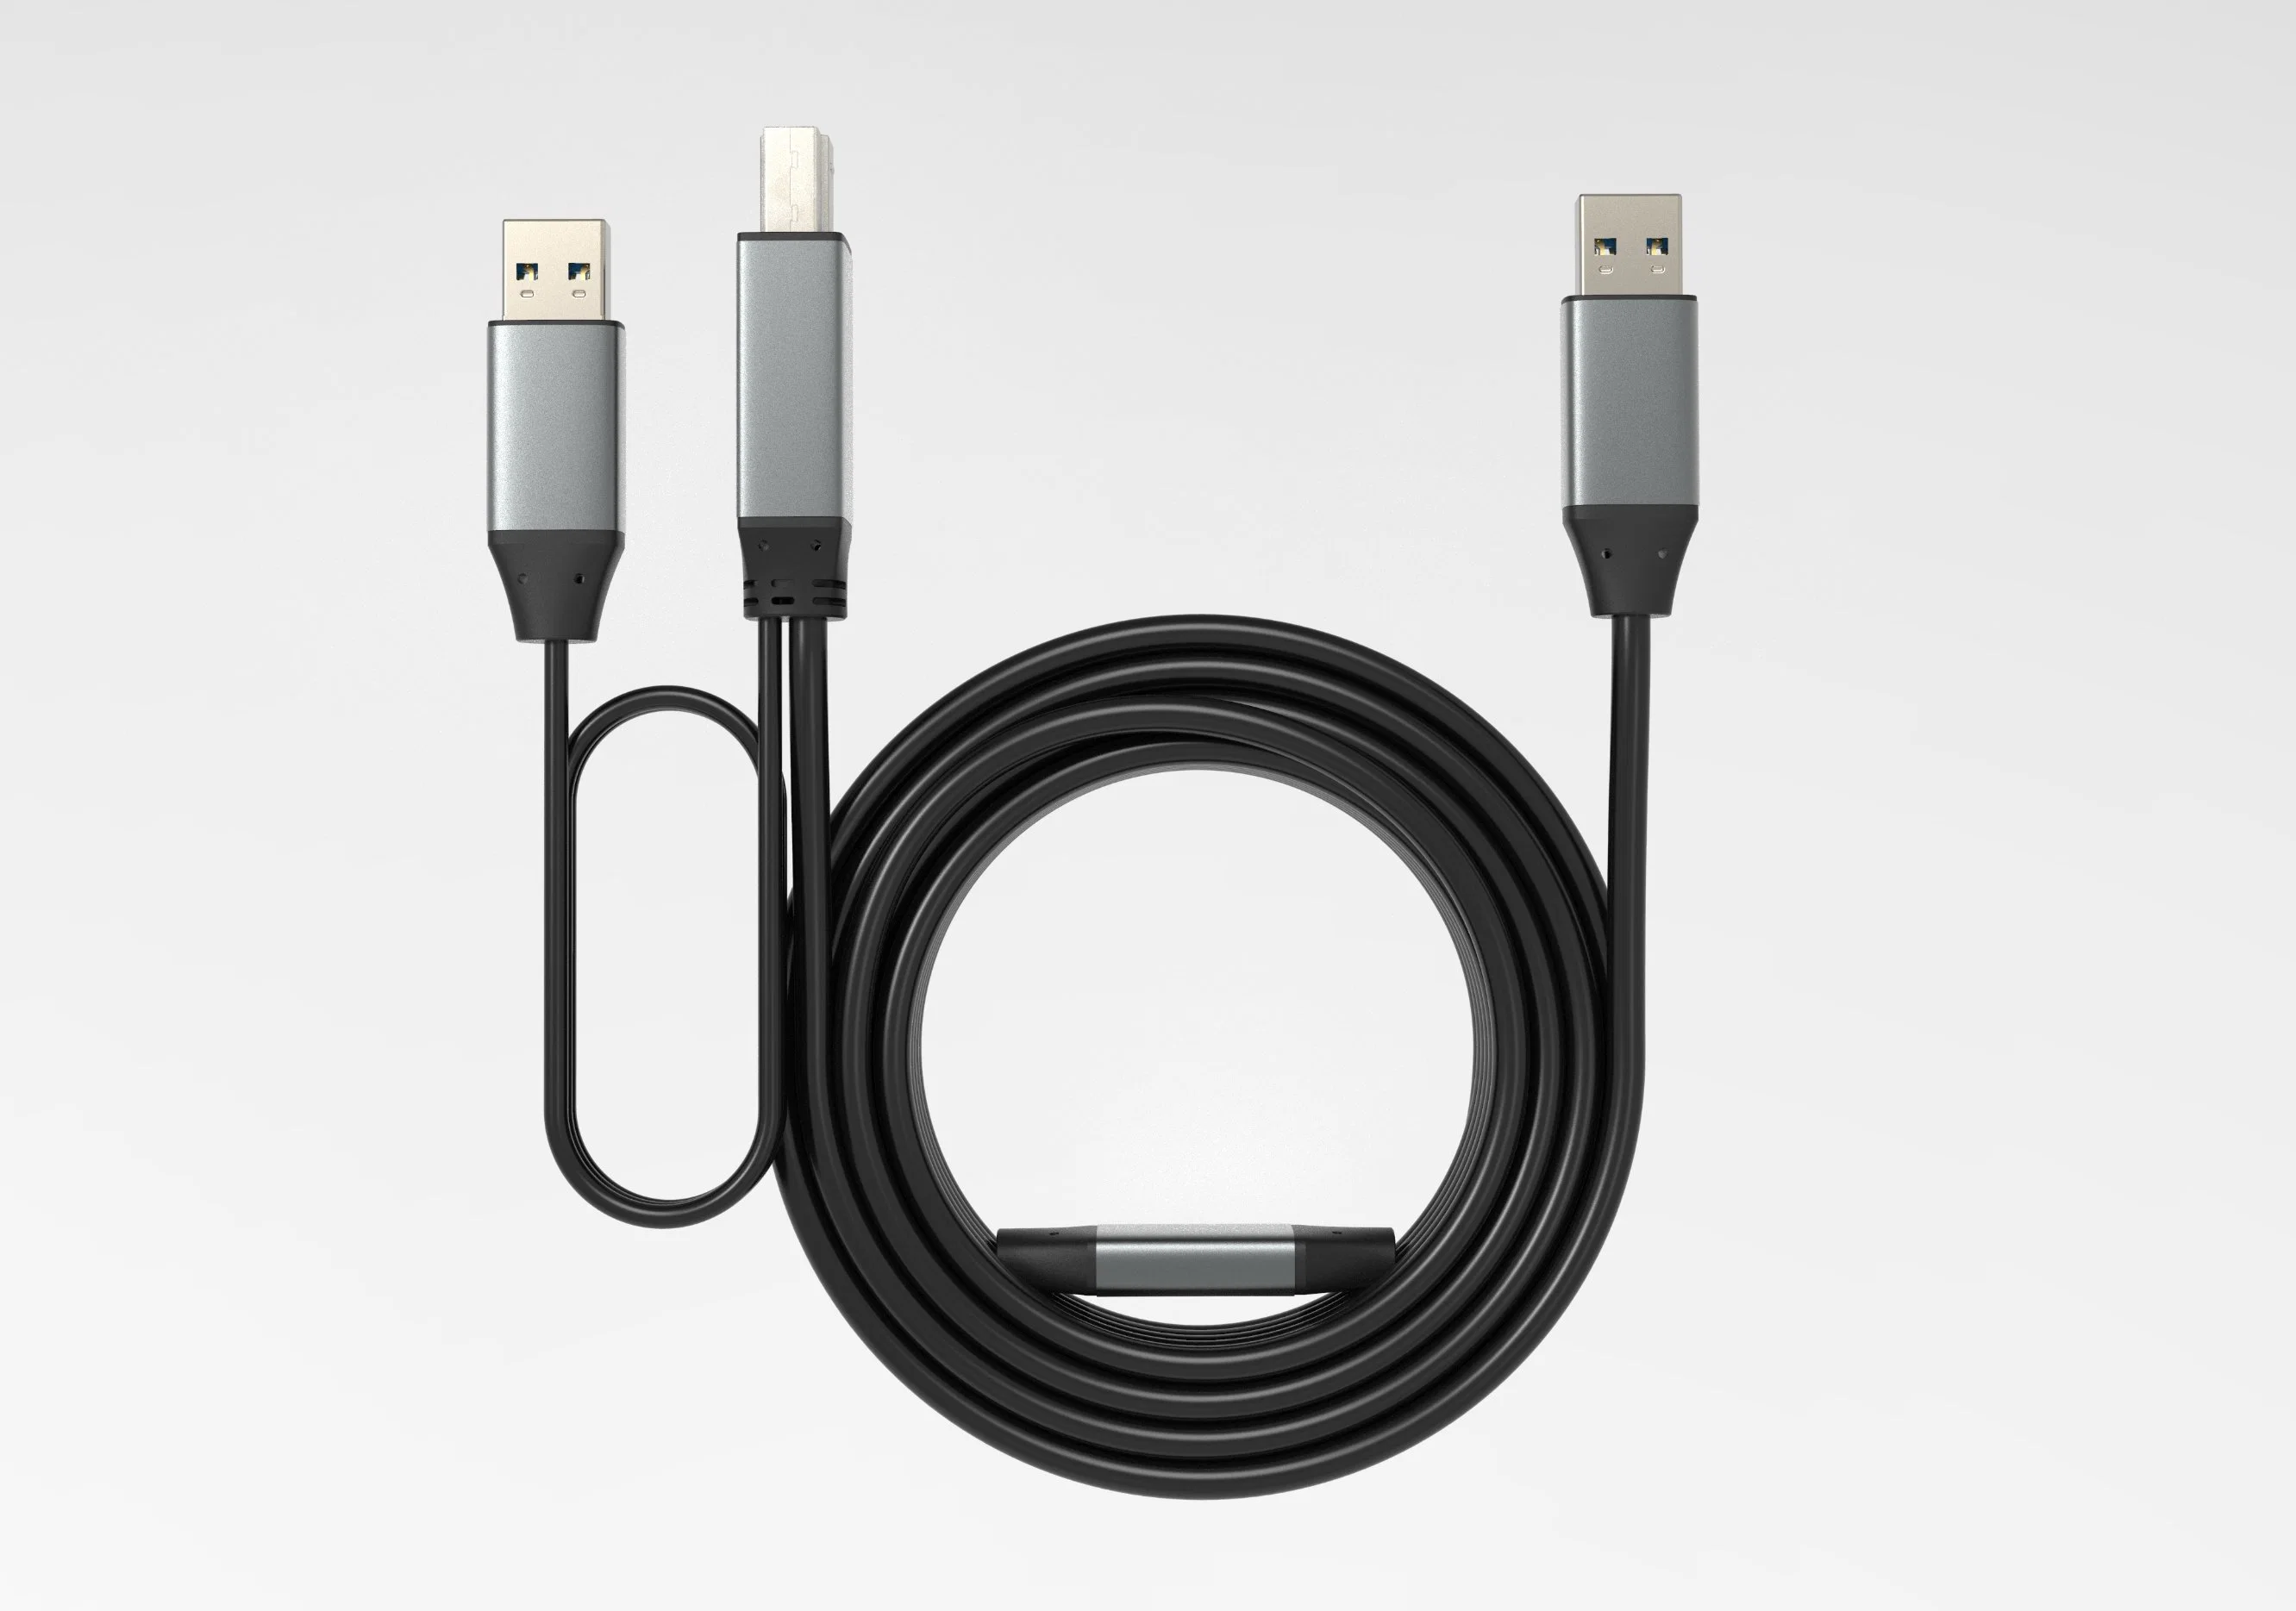 USB Extension Cable Can Be Extended up to 100m a Type to B Type USB Printer Cable 10m